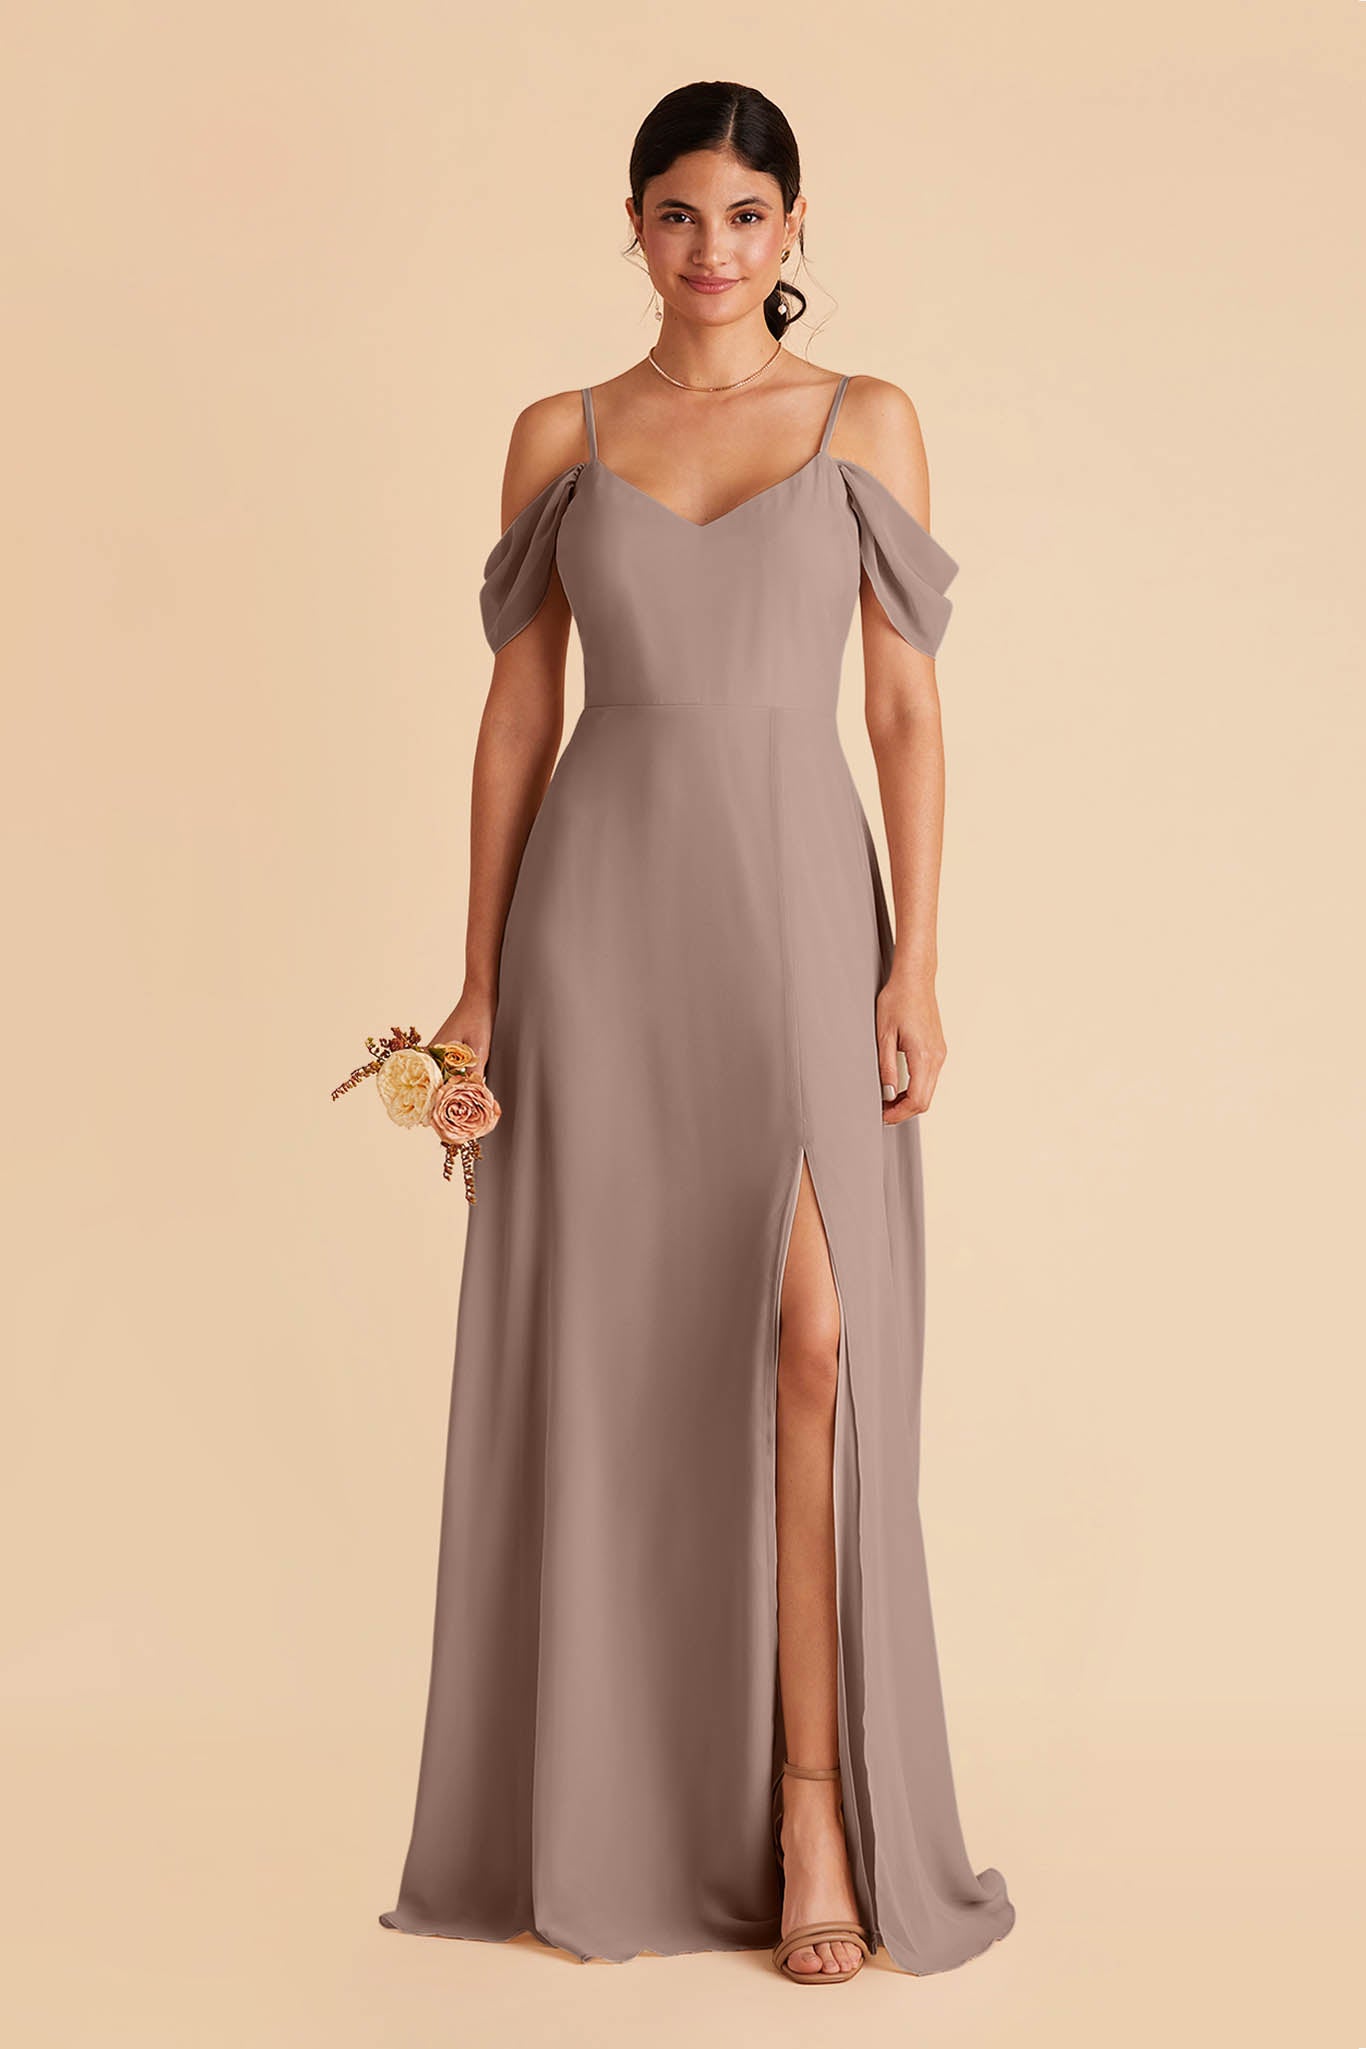 Toffee Devin Convertible Dress by Birdy Grey